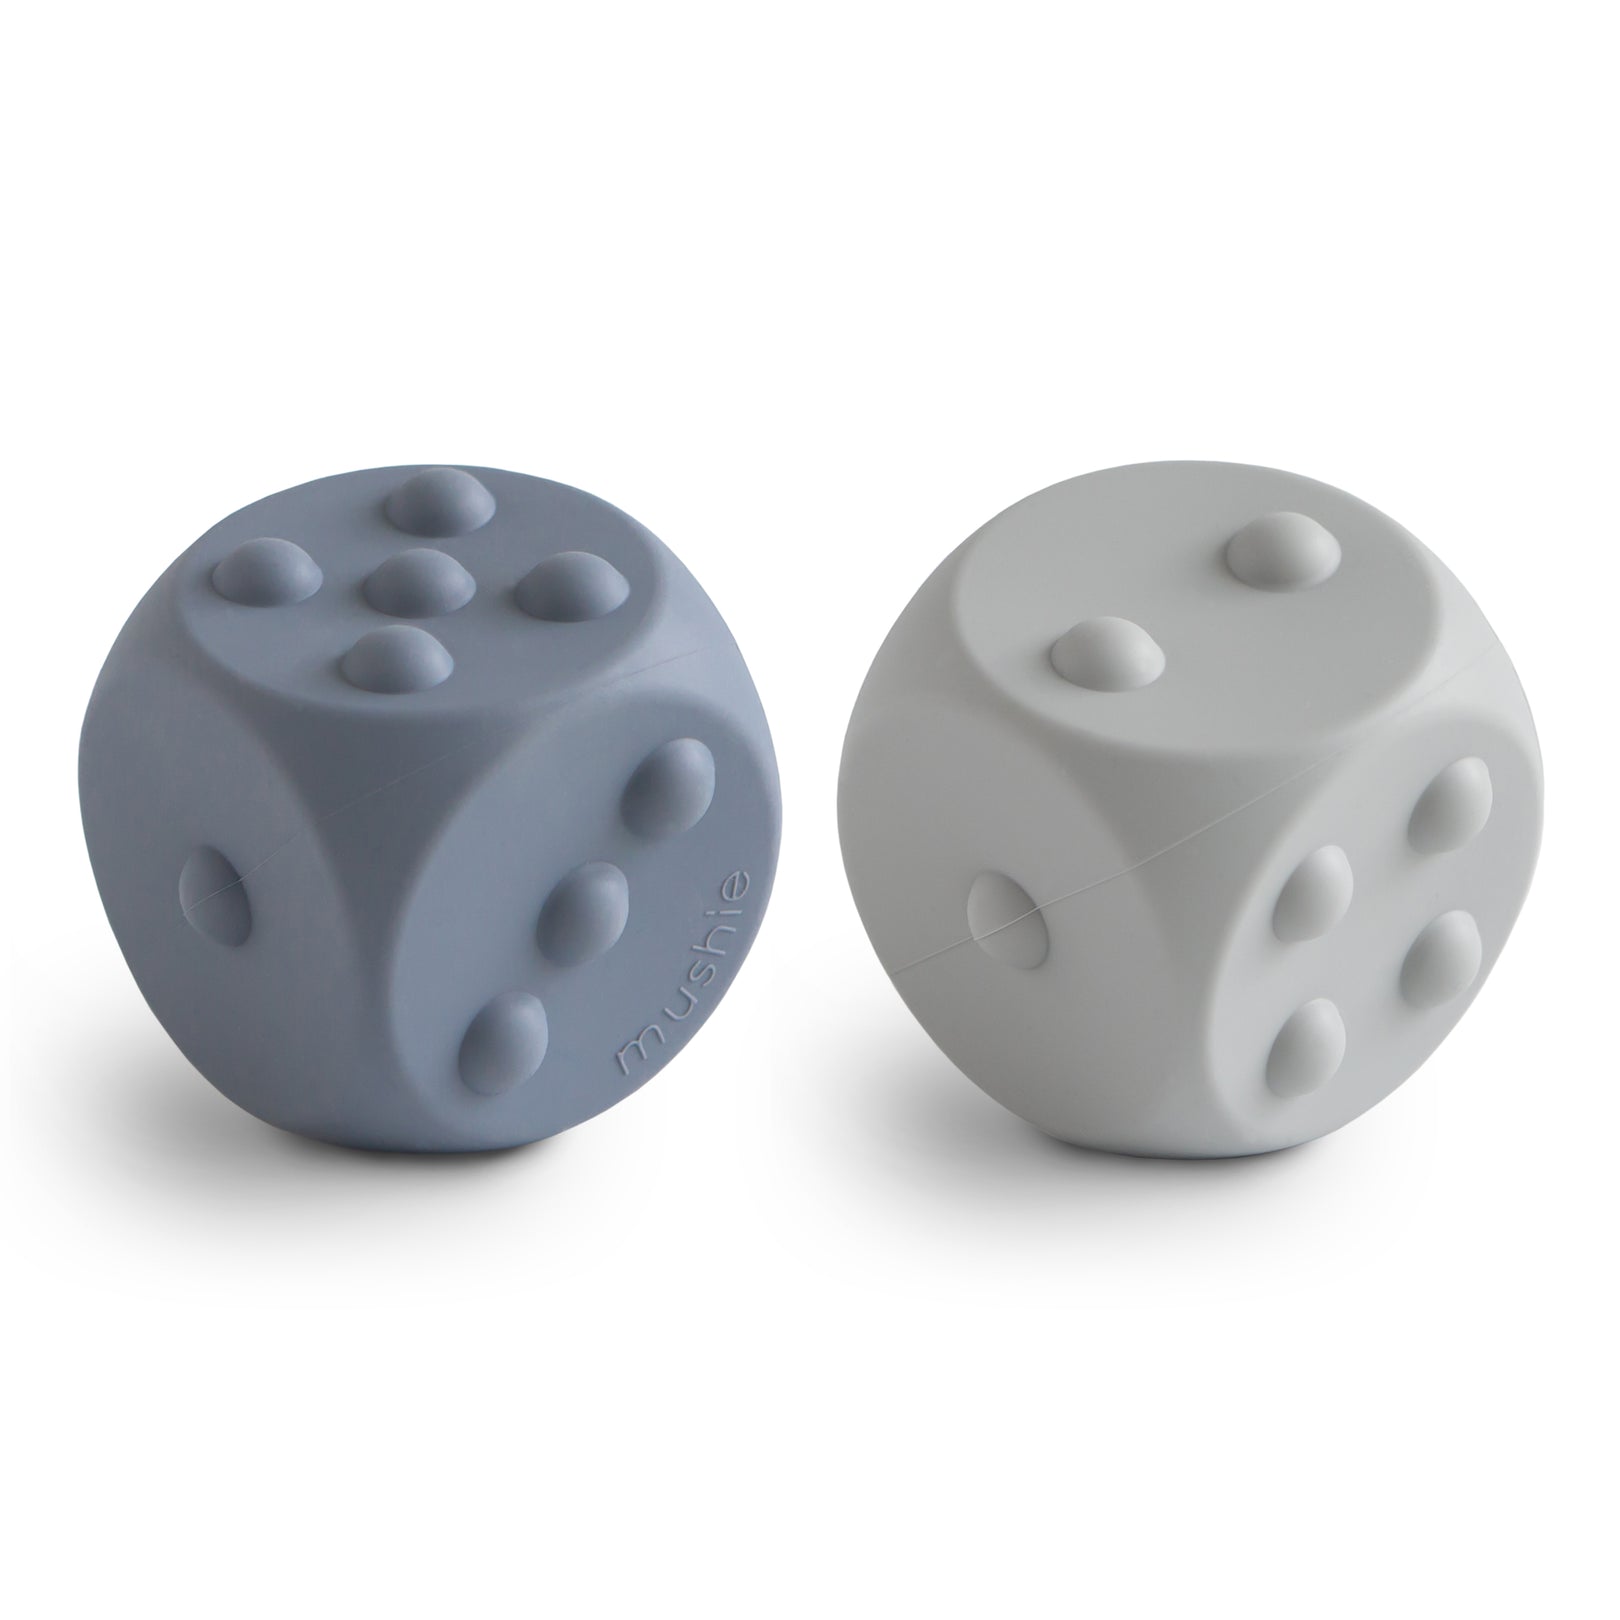 Mushie - Dice Press Toy 2-Pack - Tradewinds/Stone